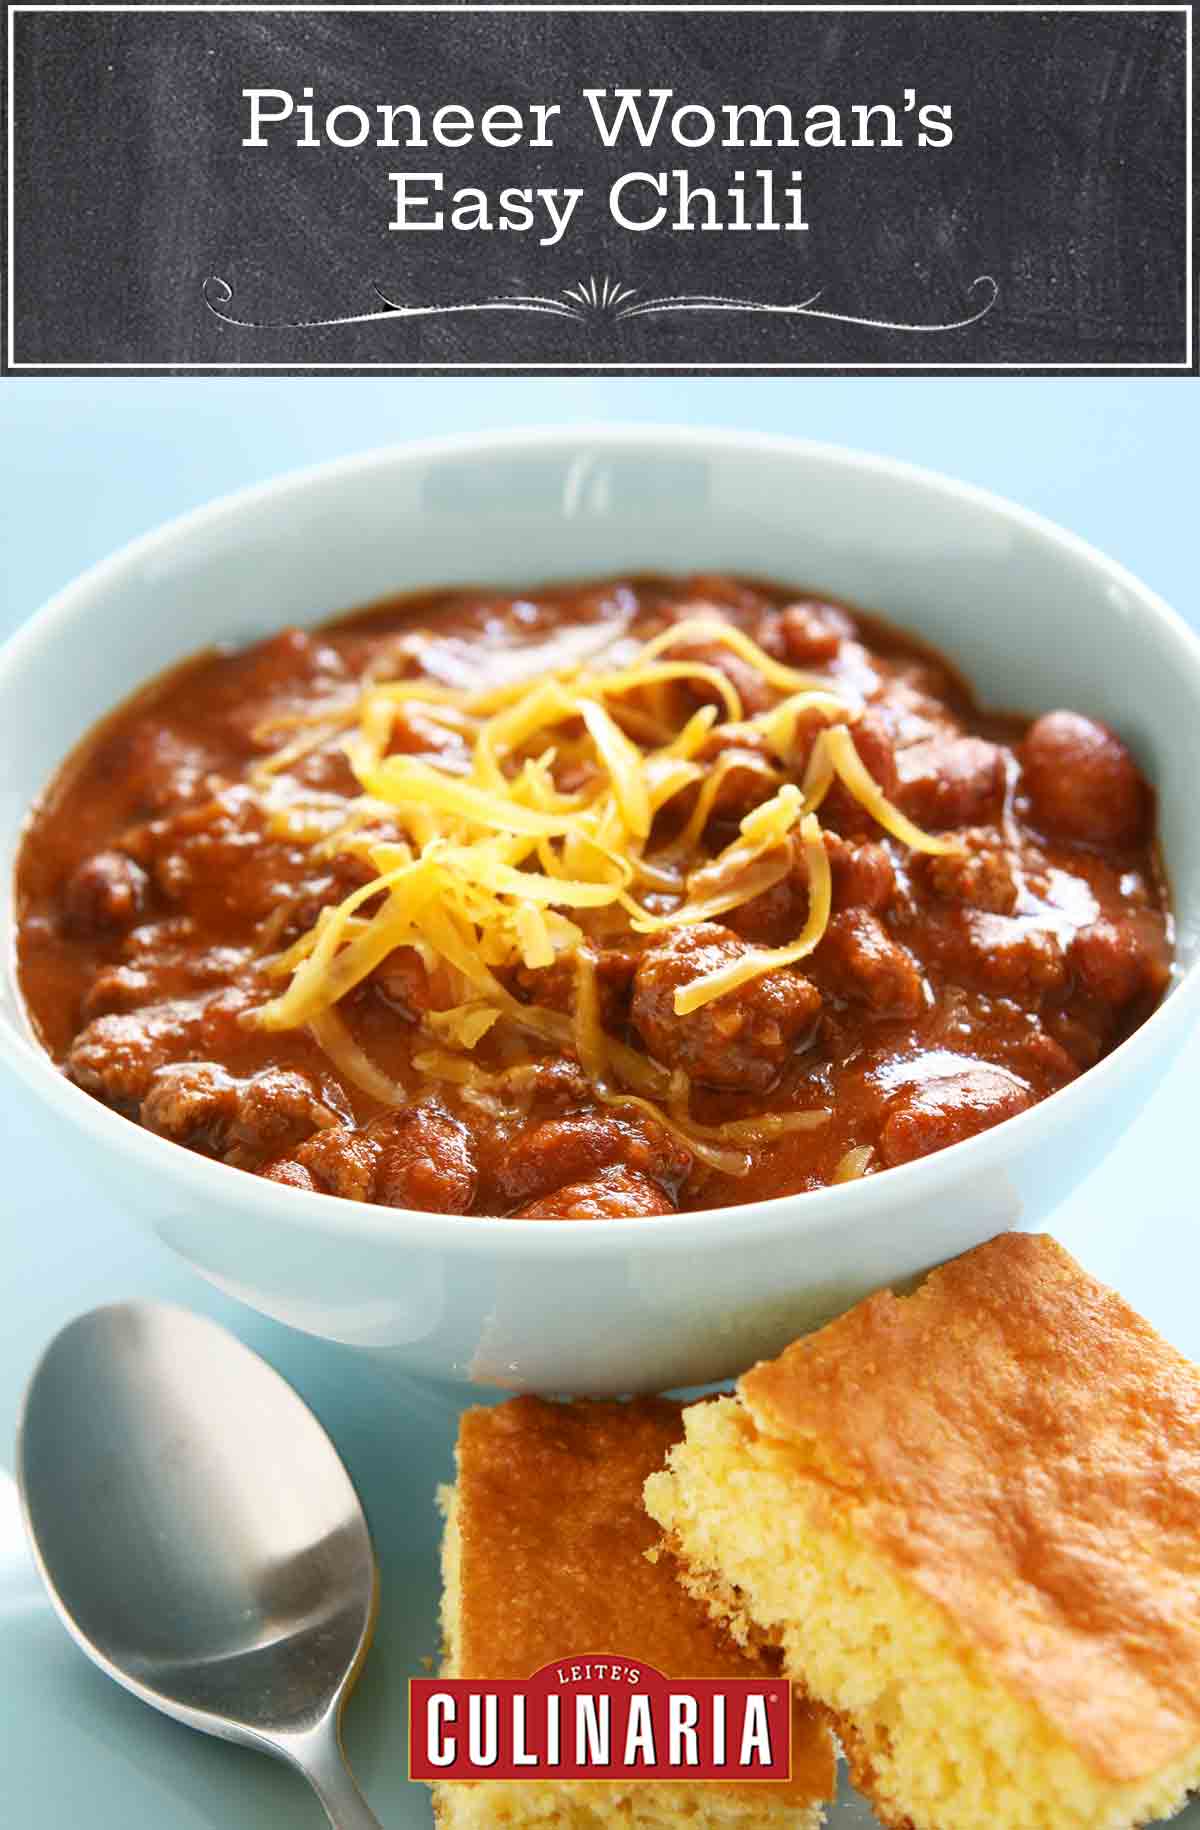 A white bowl filled with chili, with shredded cheese on top, and a spoon and two pieces of cornbread on the side.